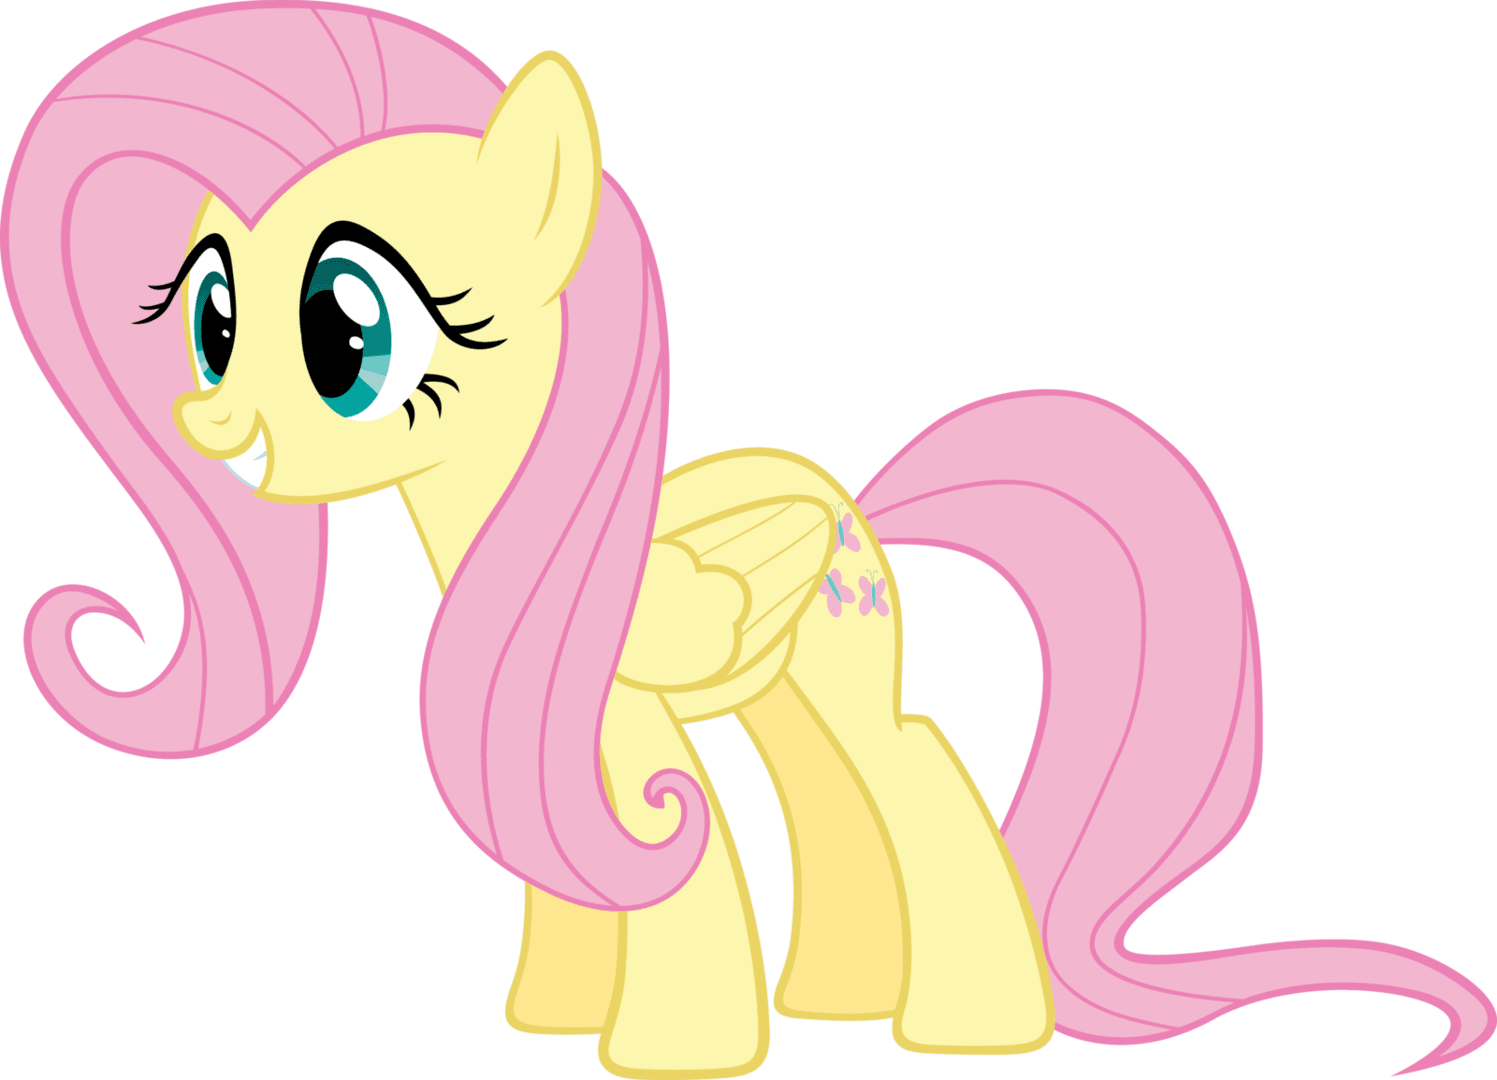 fluttershy_excited_by_myardius-d57ban2.png